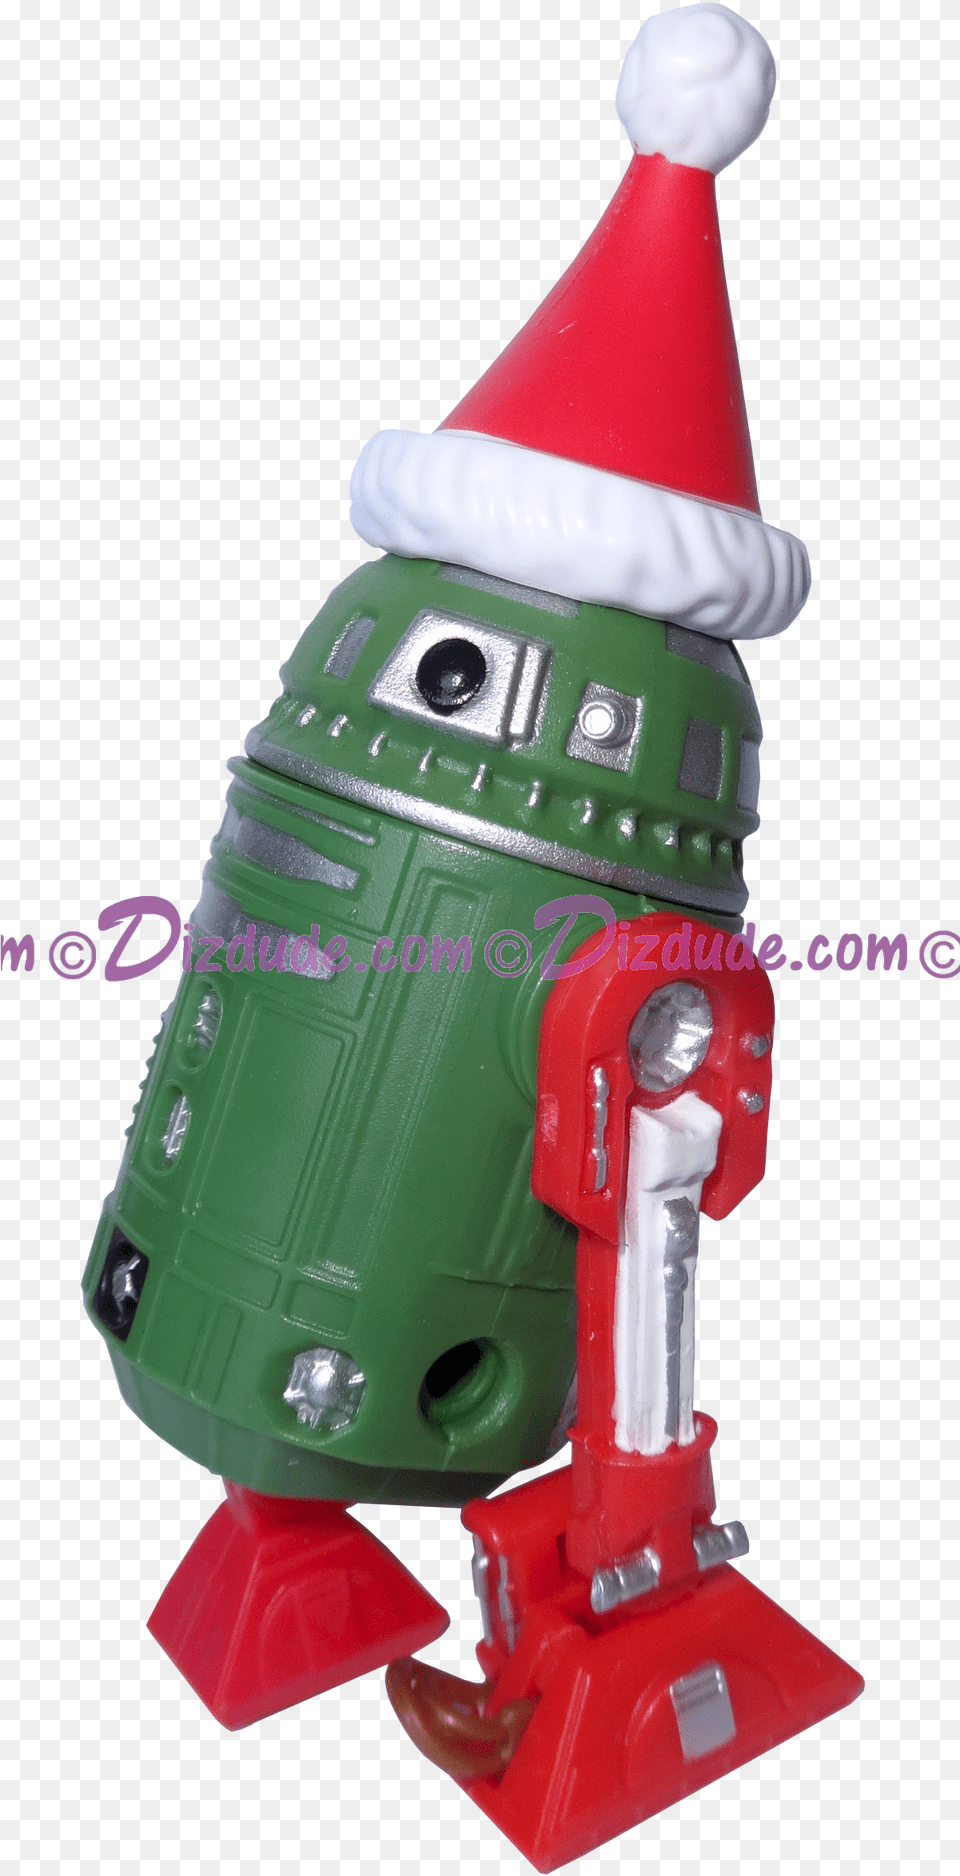 Christmas Green Amp Red With Santa Hat Astromech Droid Robot, Toy Png